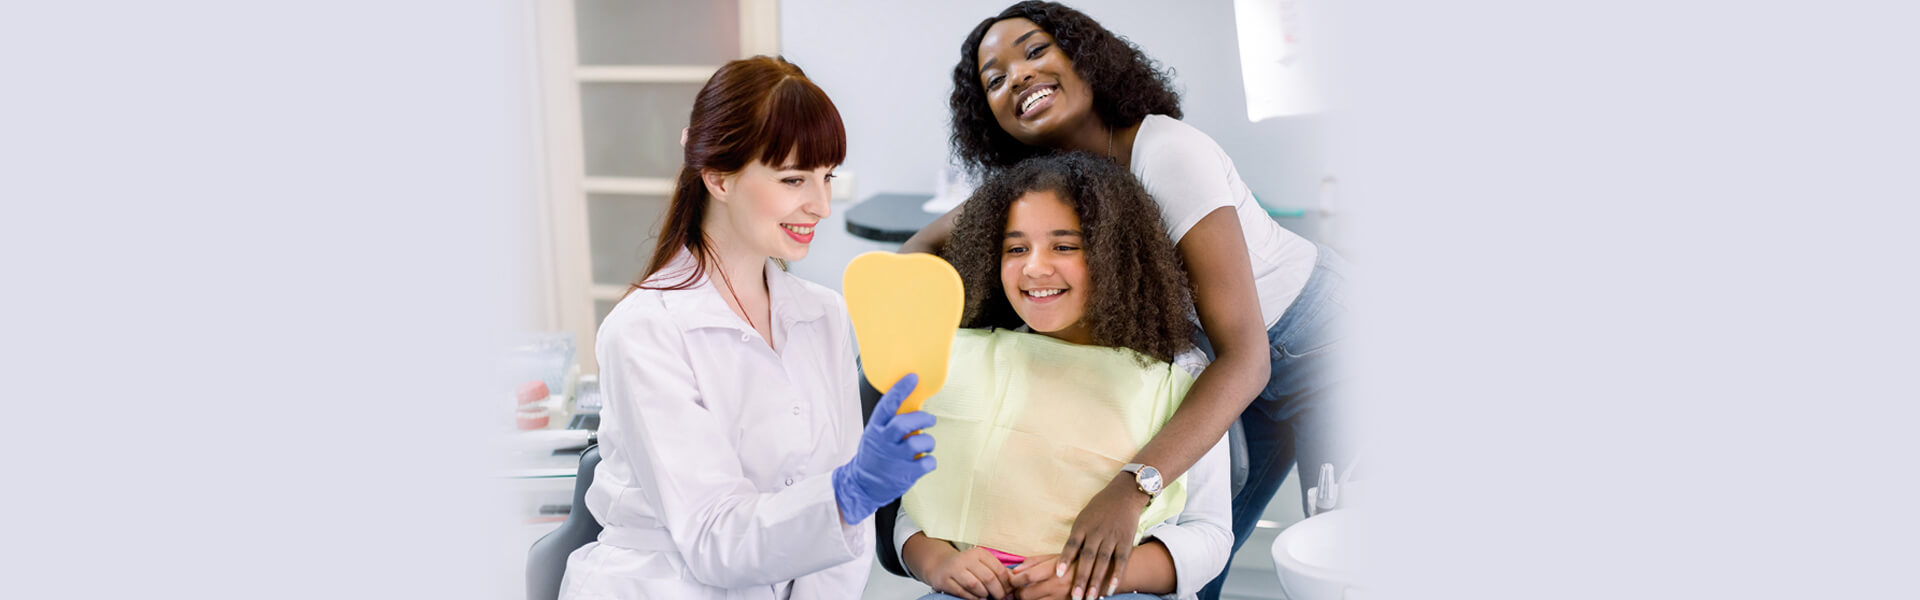 What Makes Pediatric Dentistry Special?